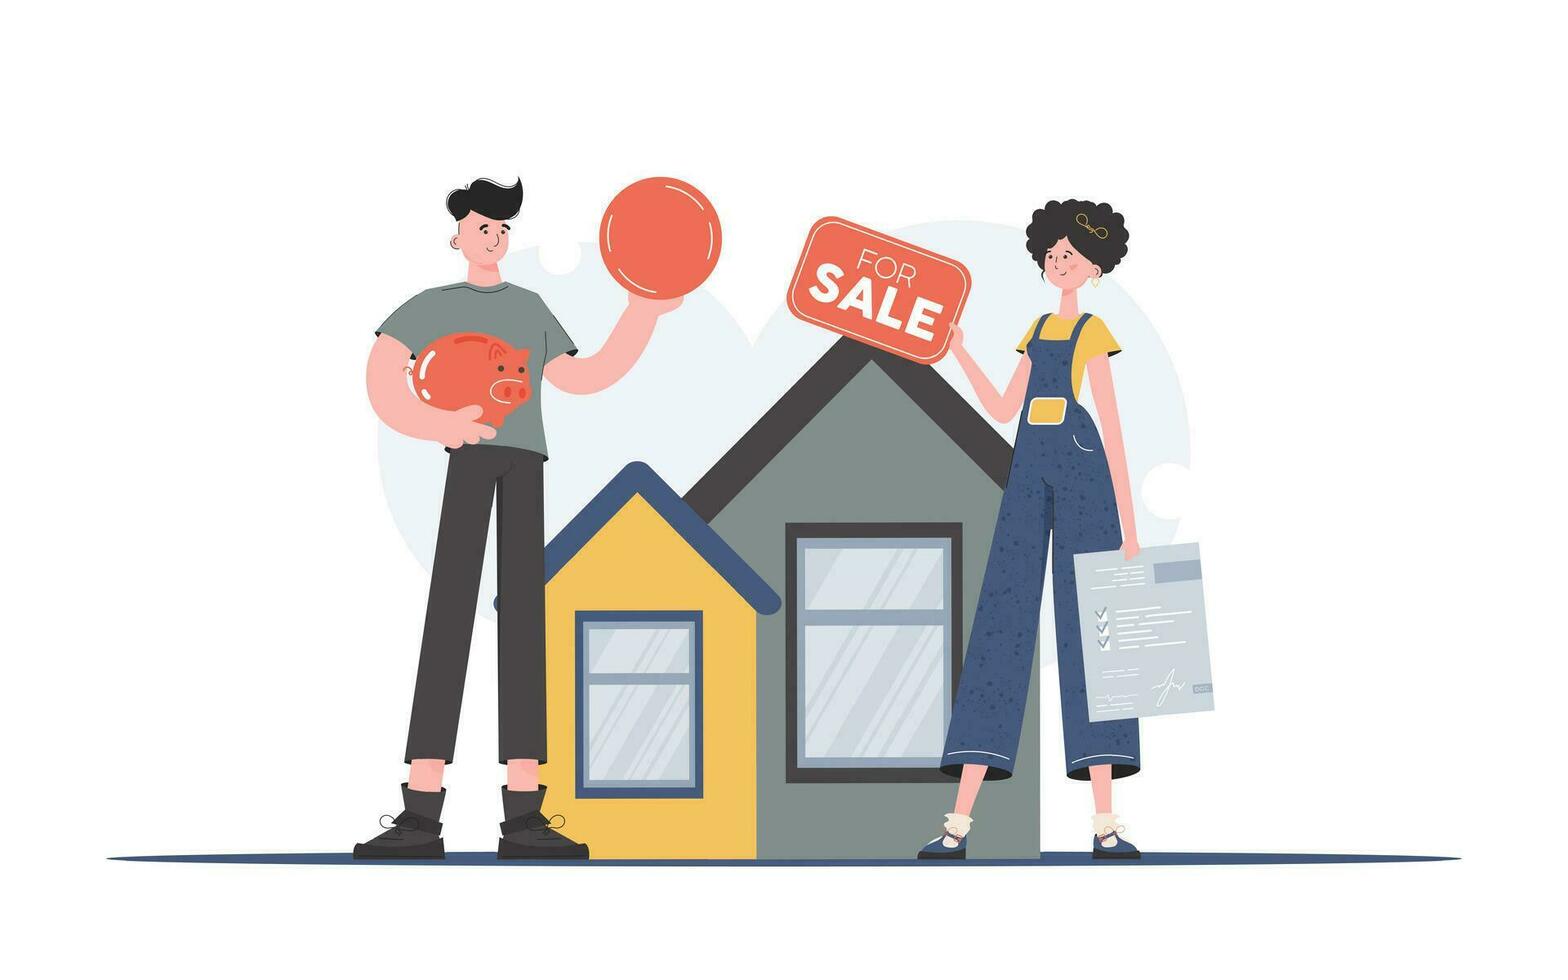 The guy is buying a house. Realtor with tabular for sale and document. The concept of buying real estate or an apartment. Trend vector illustration.